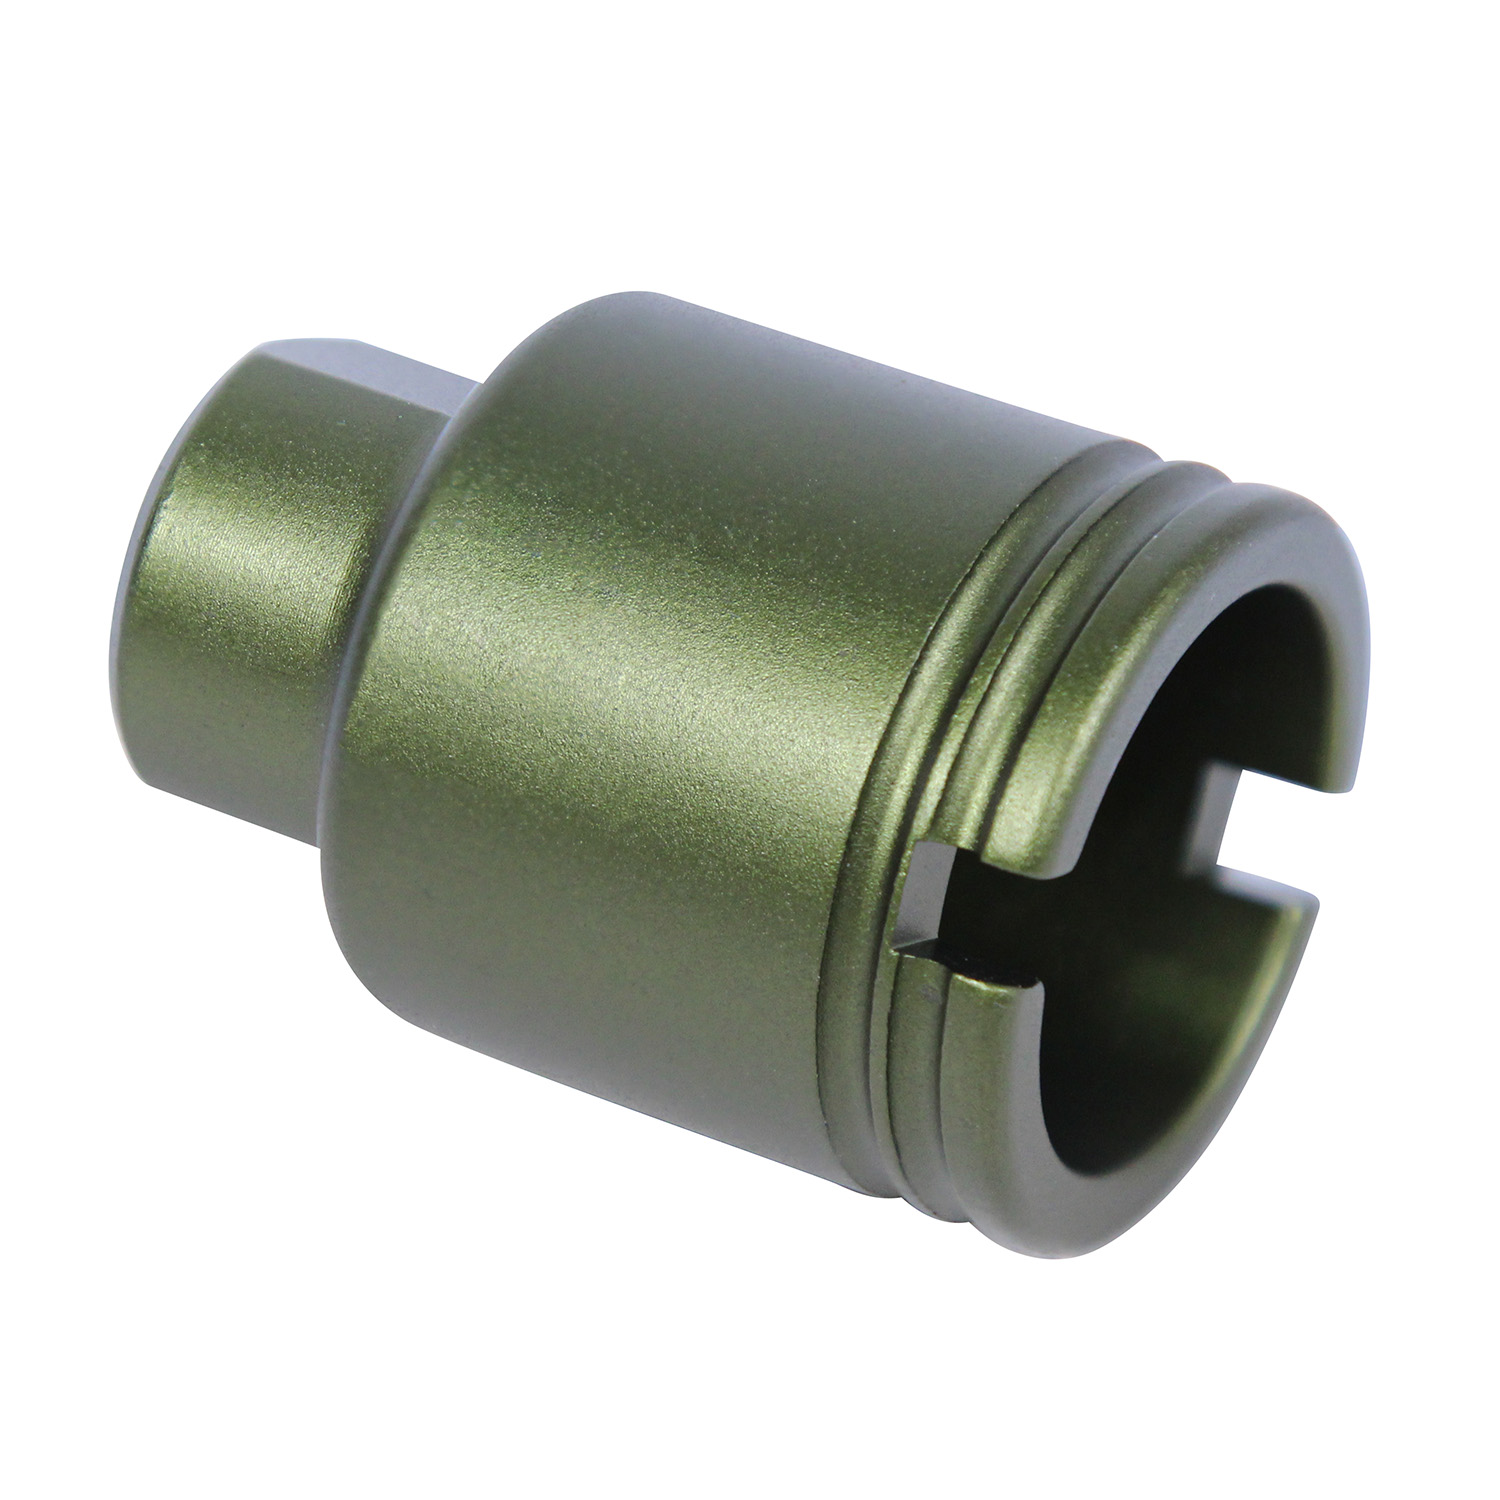 AR 9mm Stubby Slim Compact Flash Can (Anodized Green)